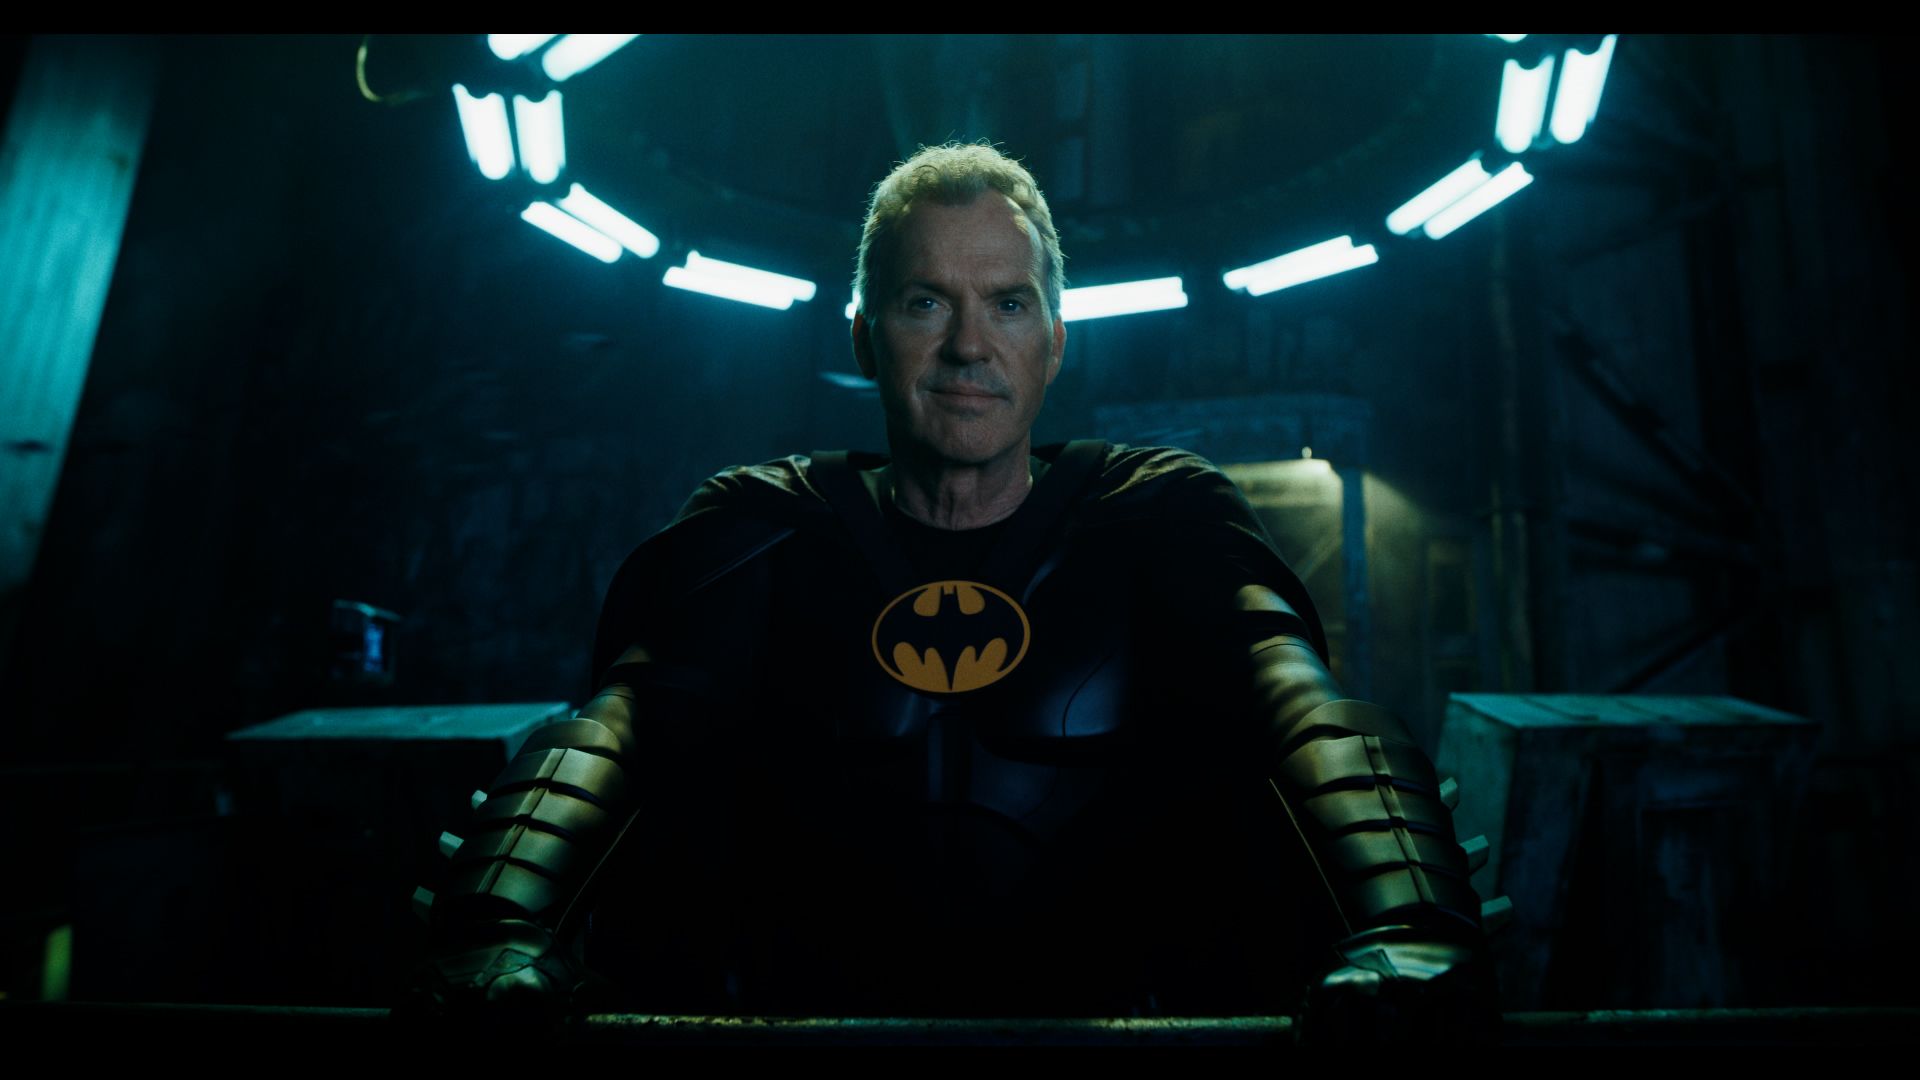 Michael Keaton is back as Batman in new trailer for 'The Flash'